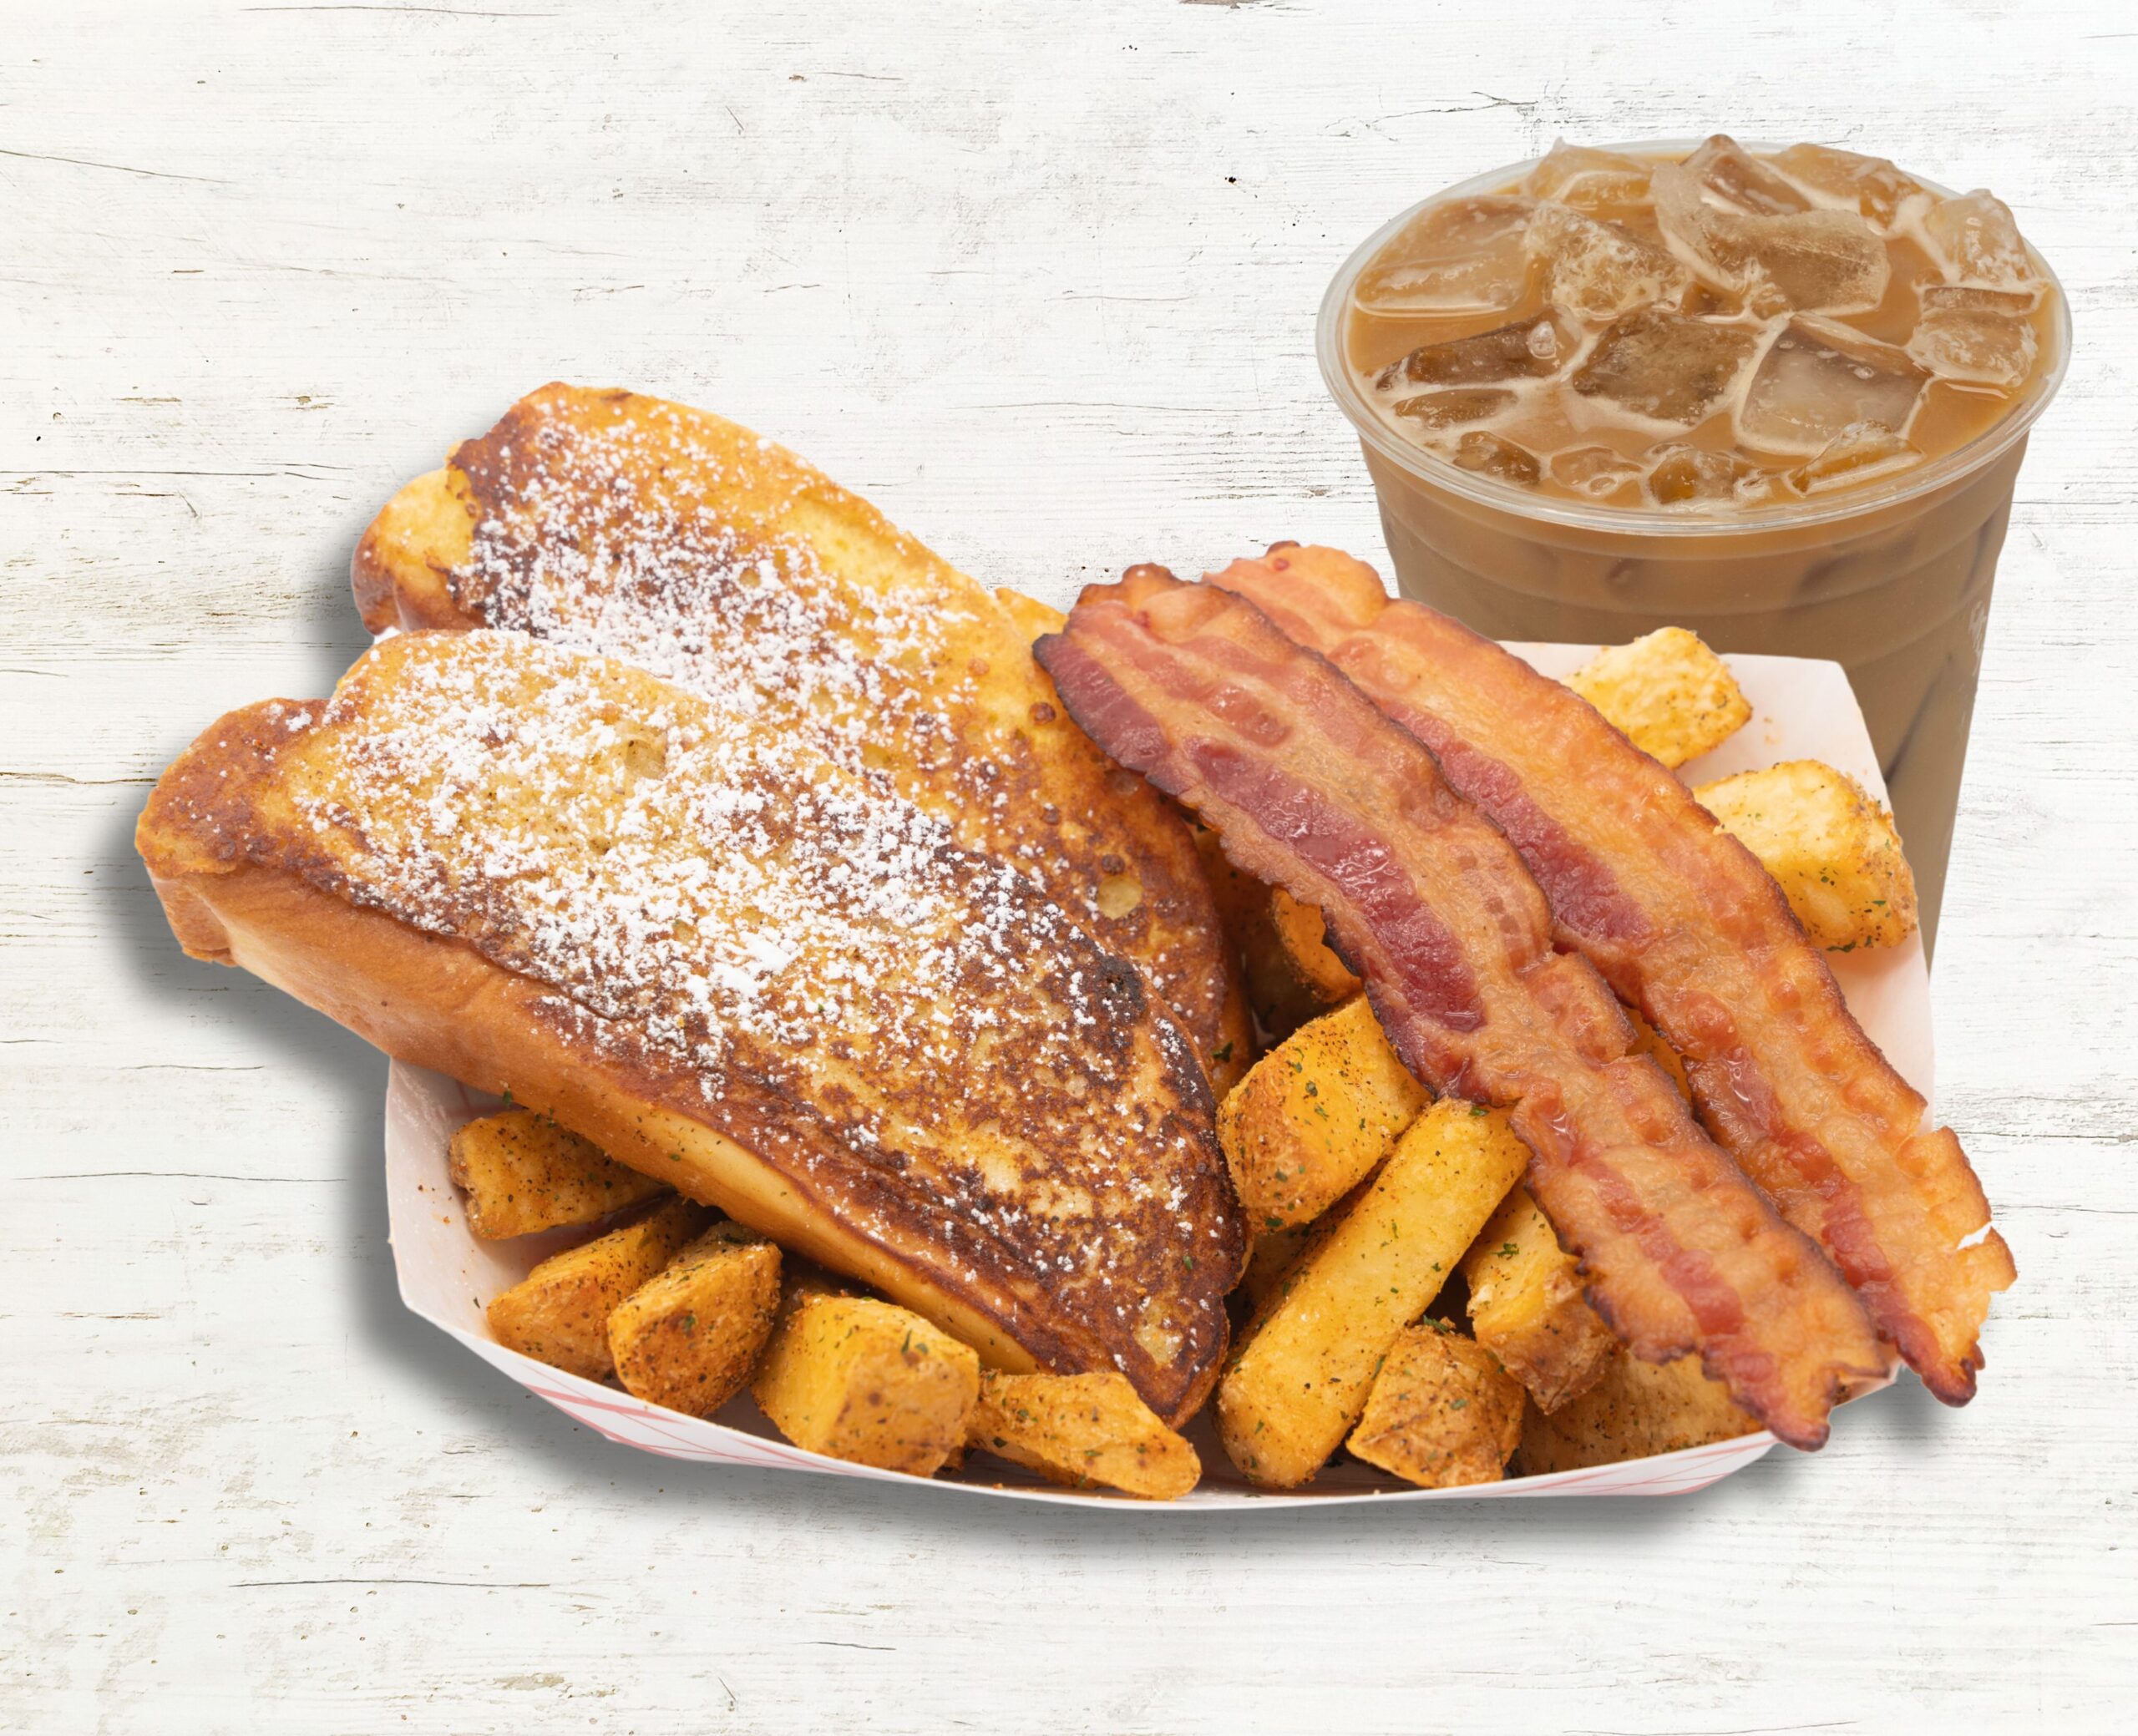 Image for #10 French Toast with Bacon or Sausage